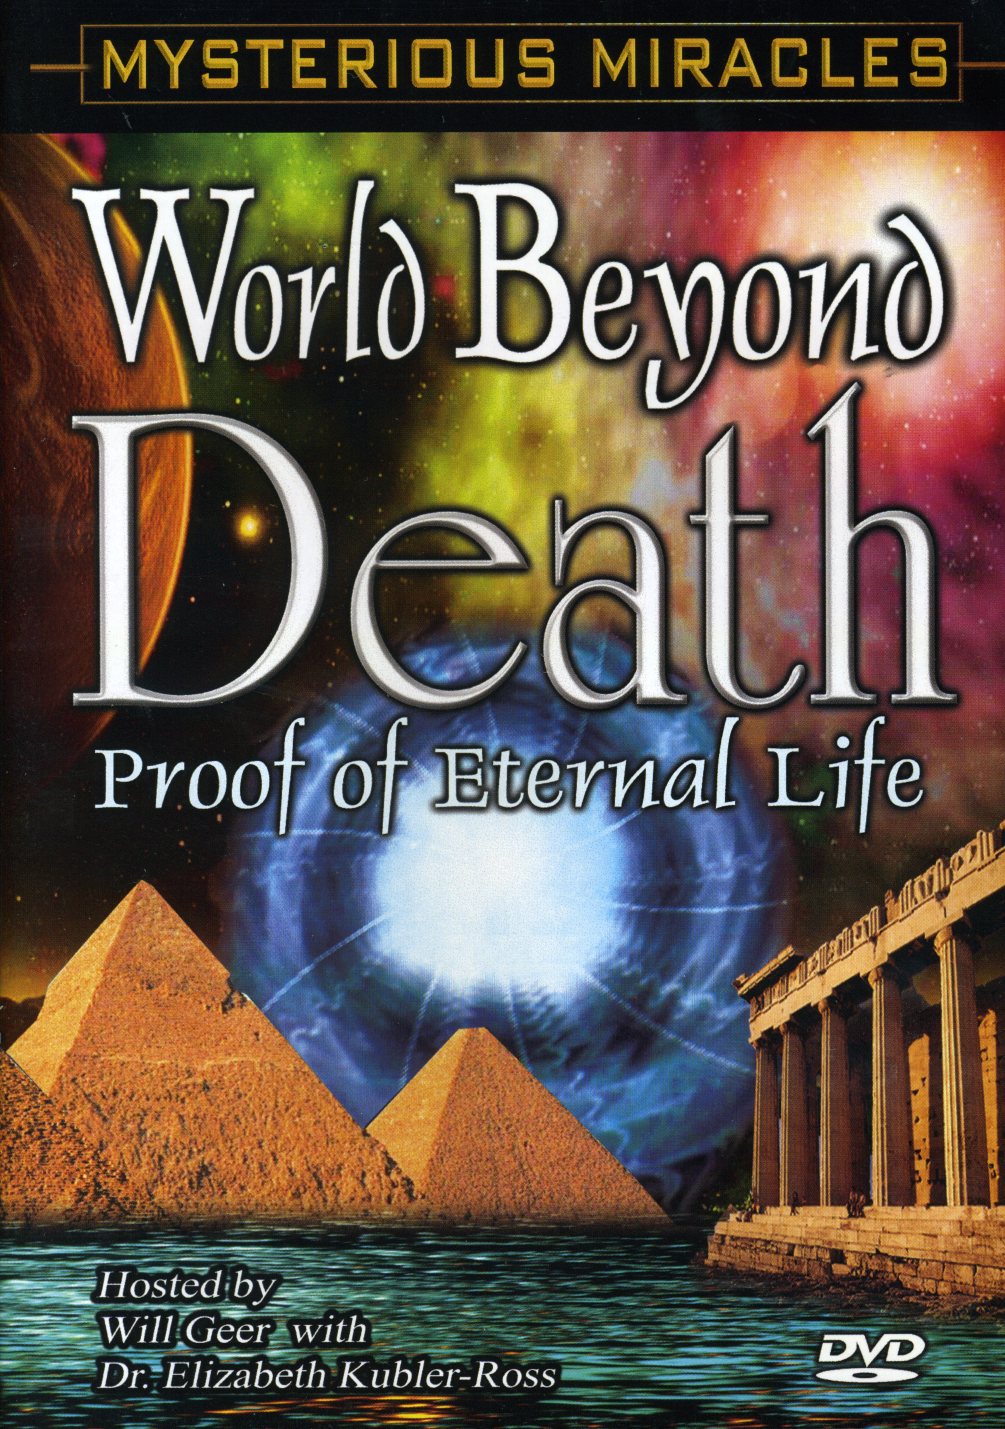 MYSTERIOUS MIRACLES: WORLD BEYOND DEATH